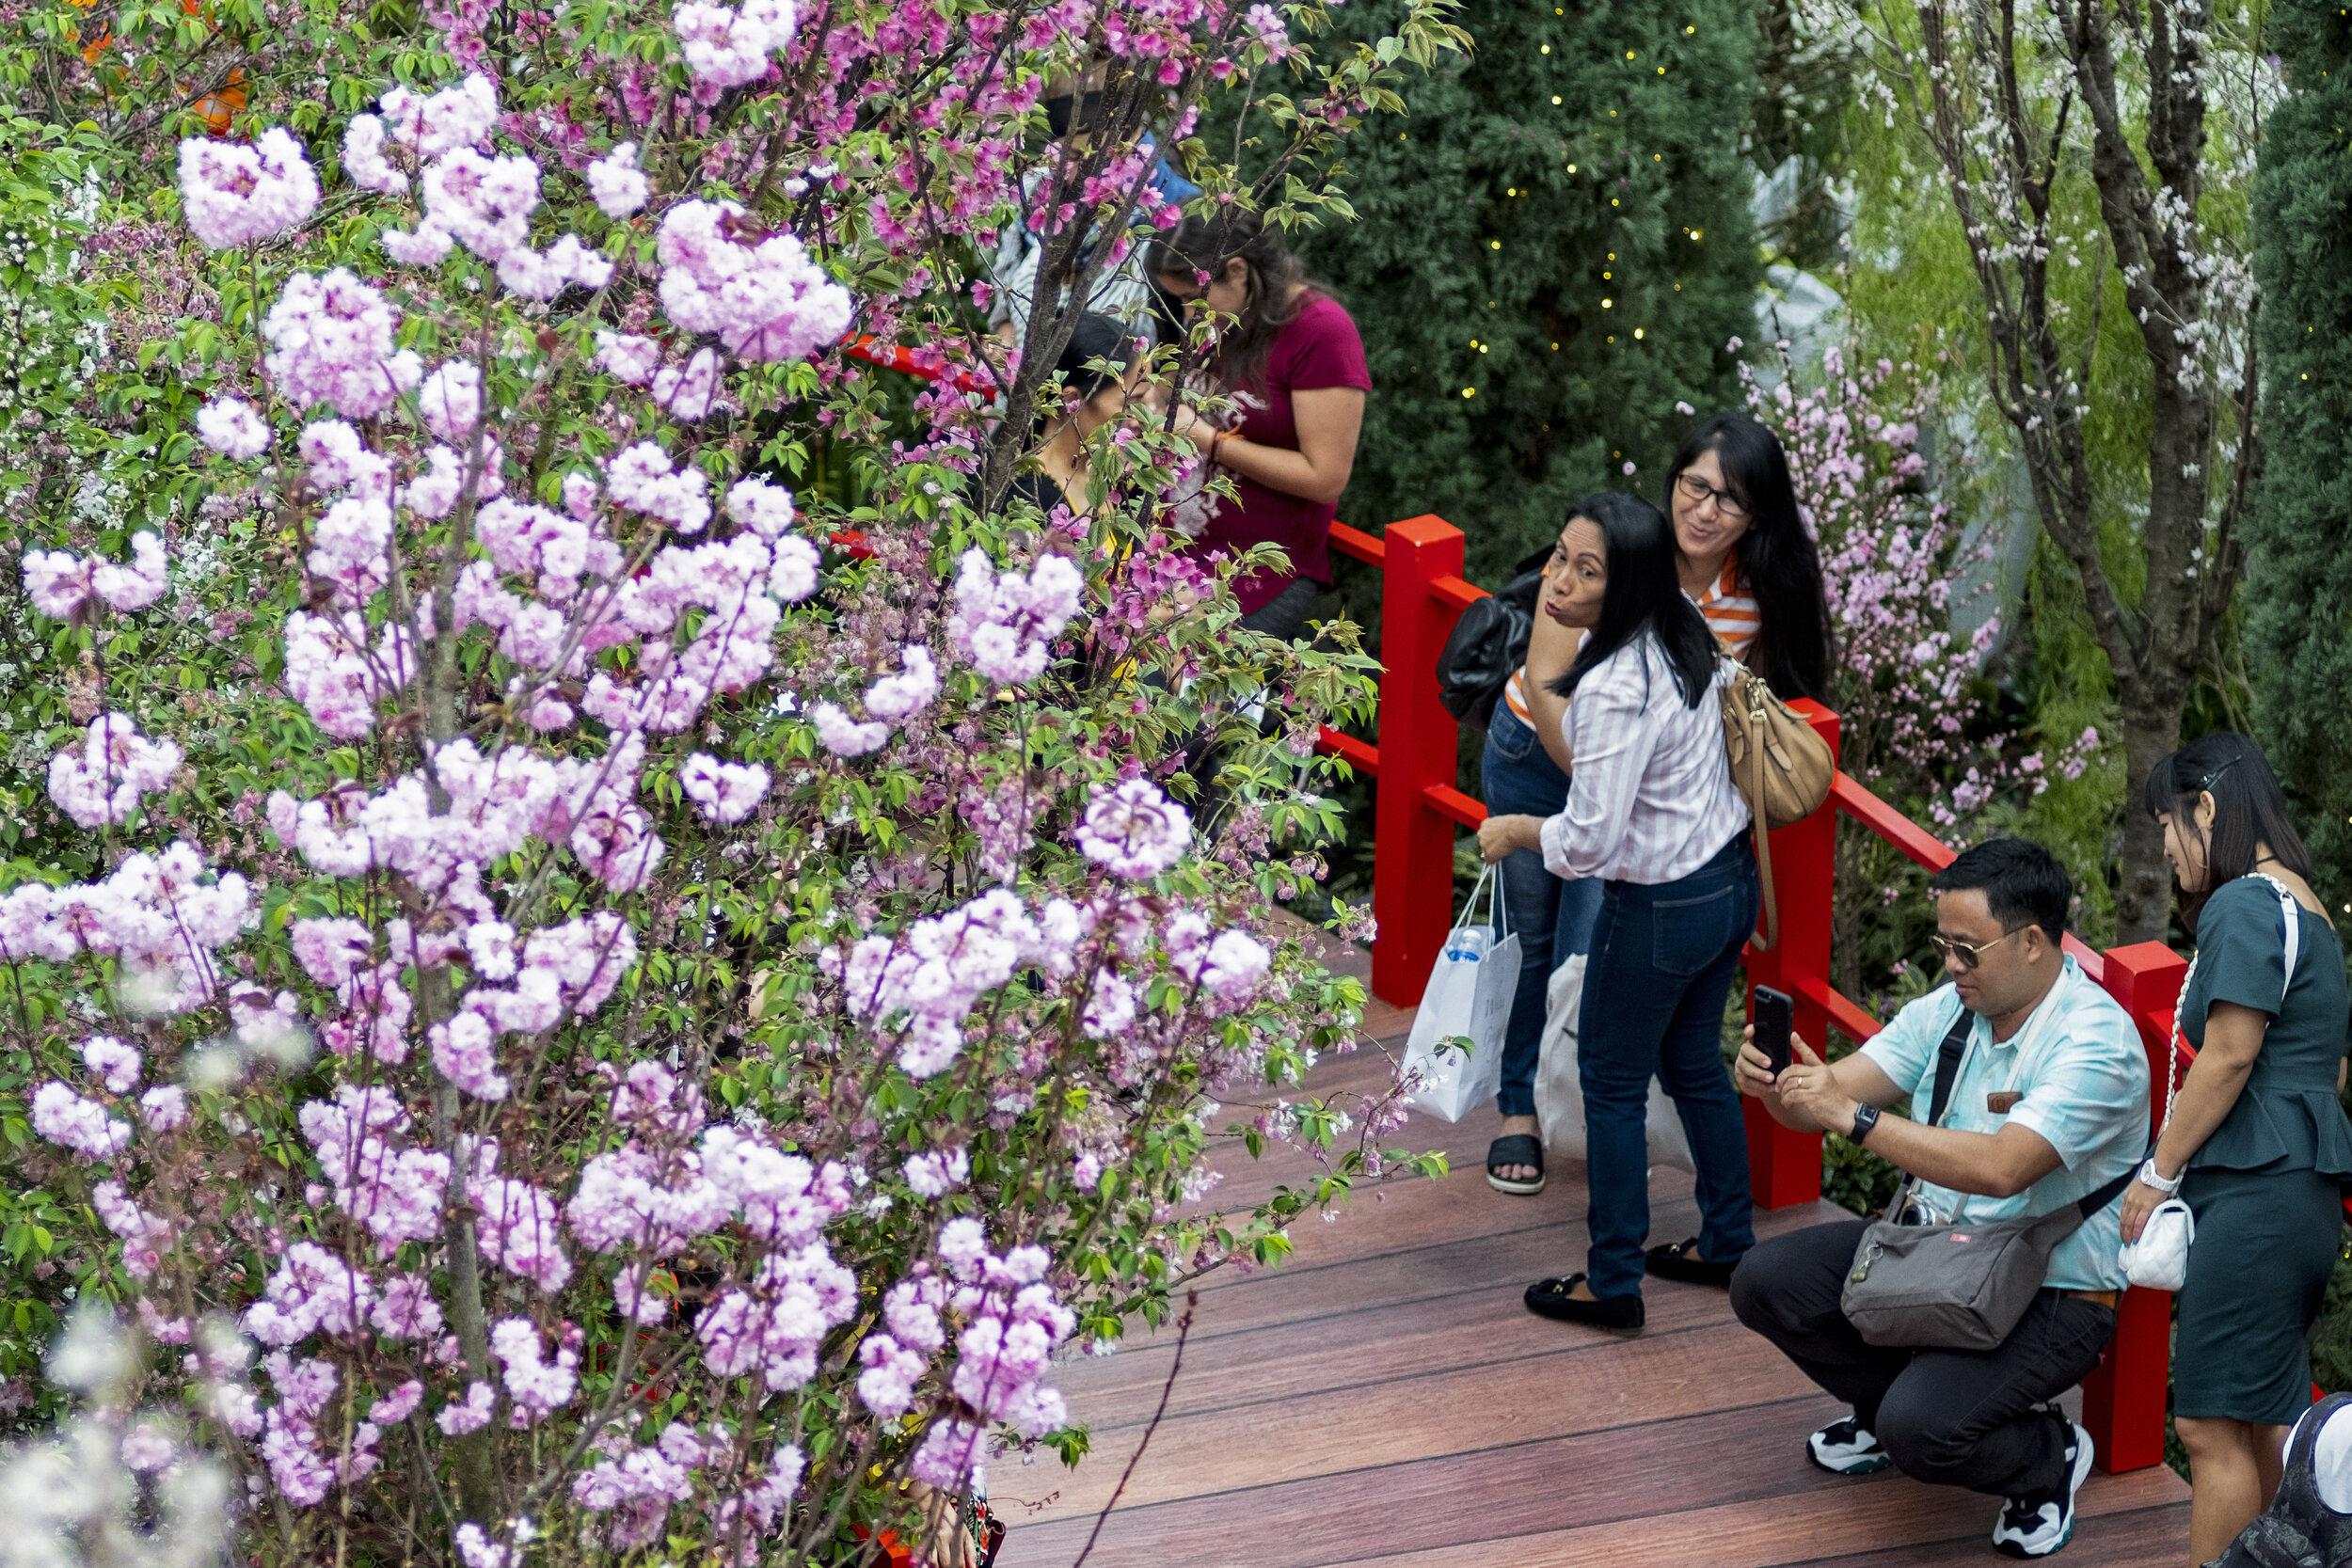  Visitors react as a man squats to take pictures of cherry blossoms and surrounding foliage during the Sakura Matsuri floral display at Gardens by the Bay in Singapore 